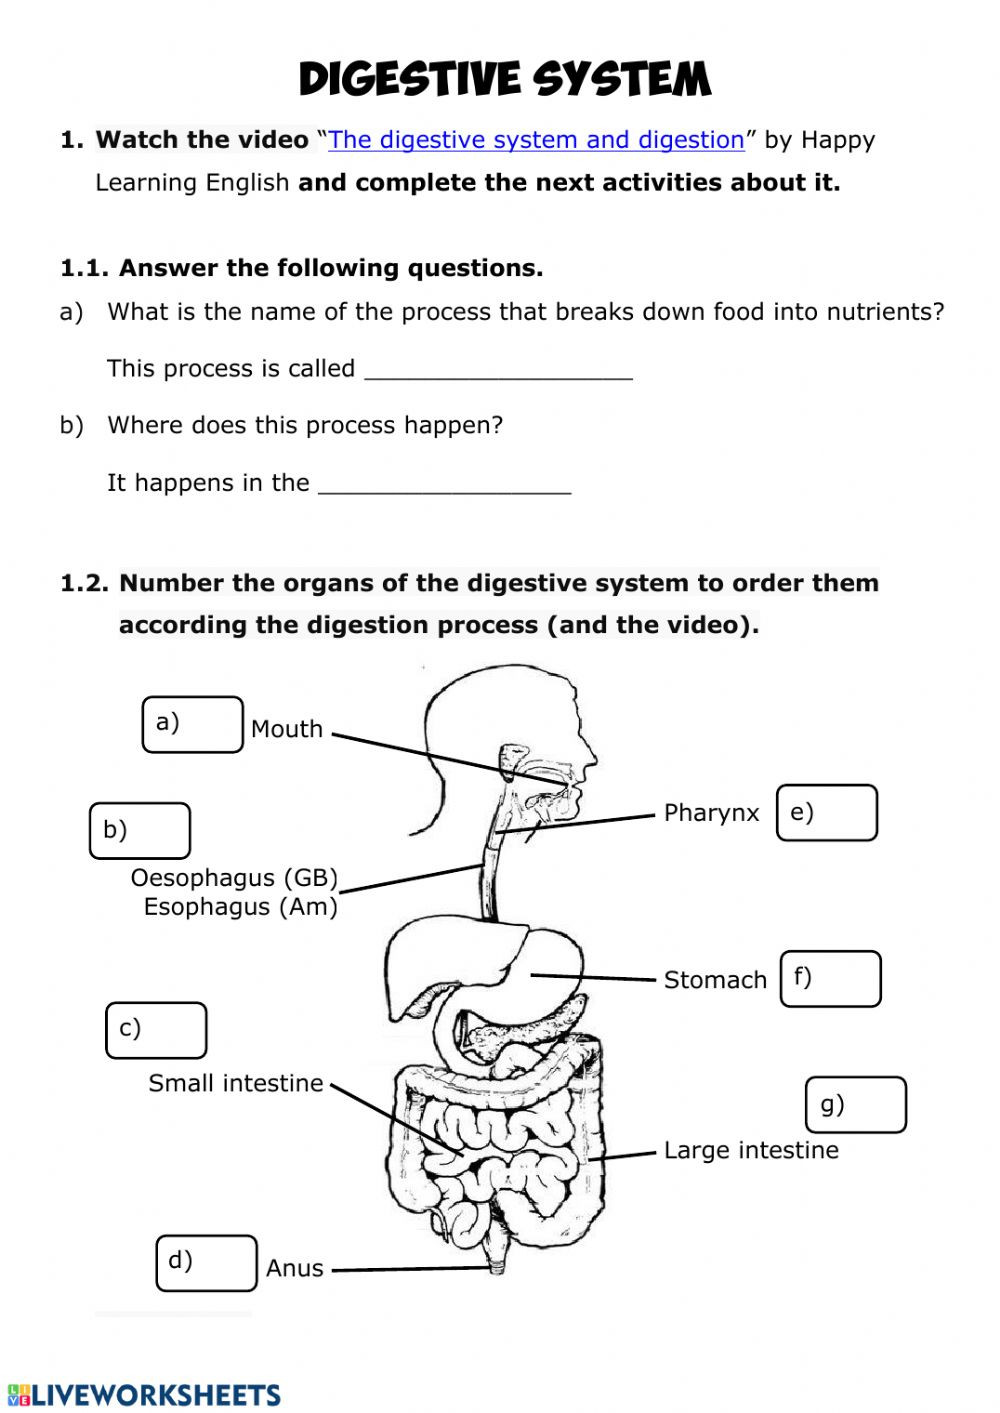 Digestive System Worksheet Answers Nutrition 2 Digestive System Interactive Worksheet